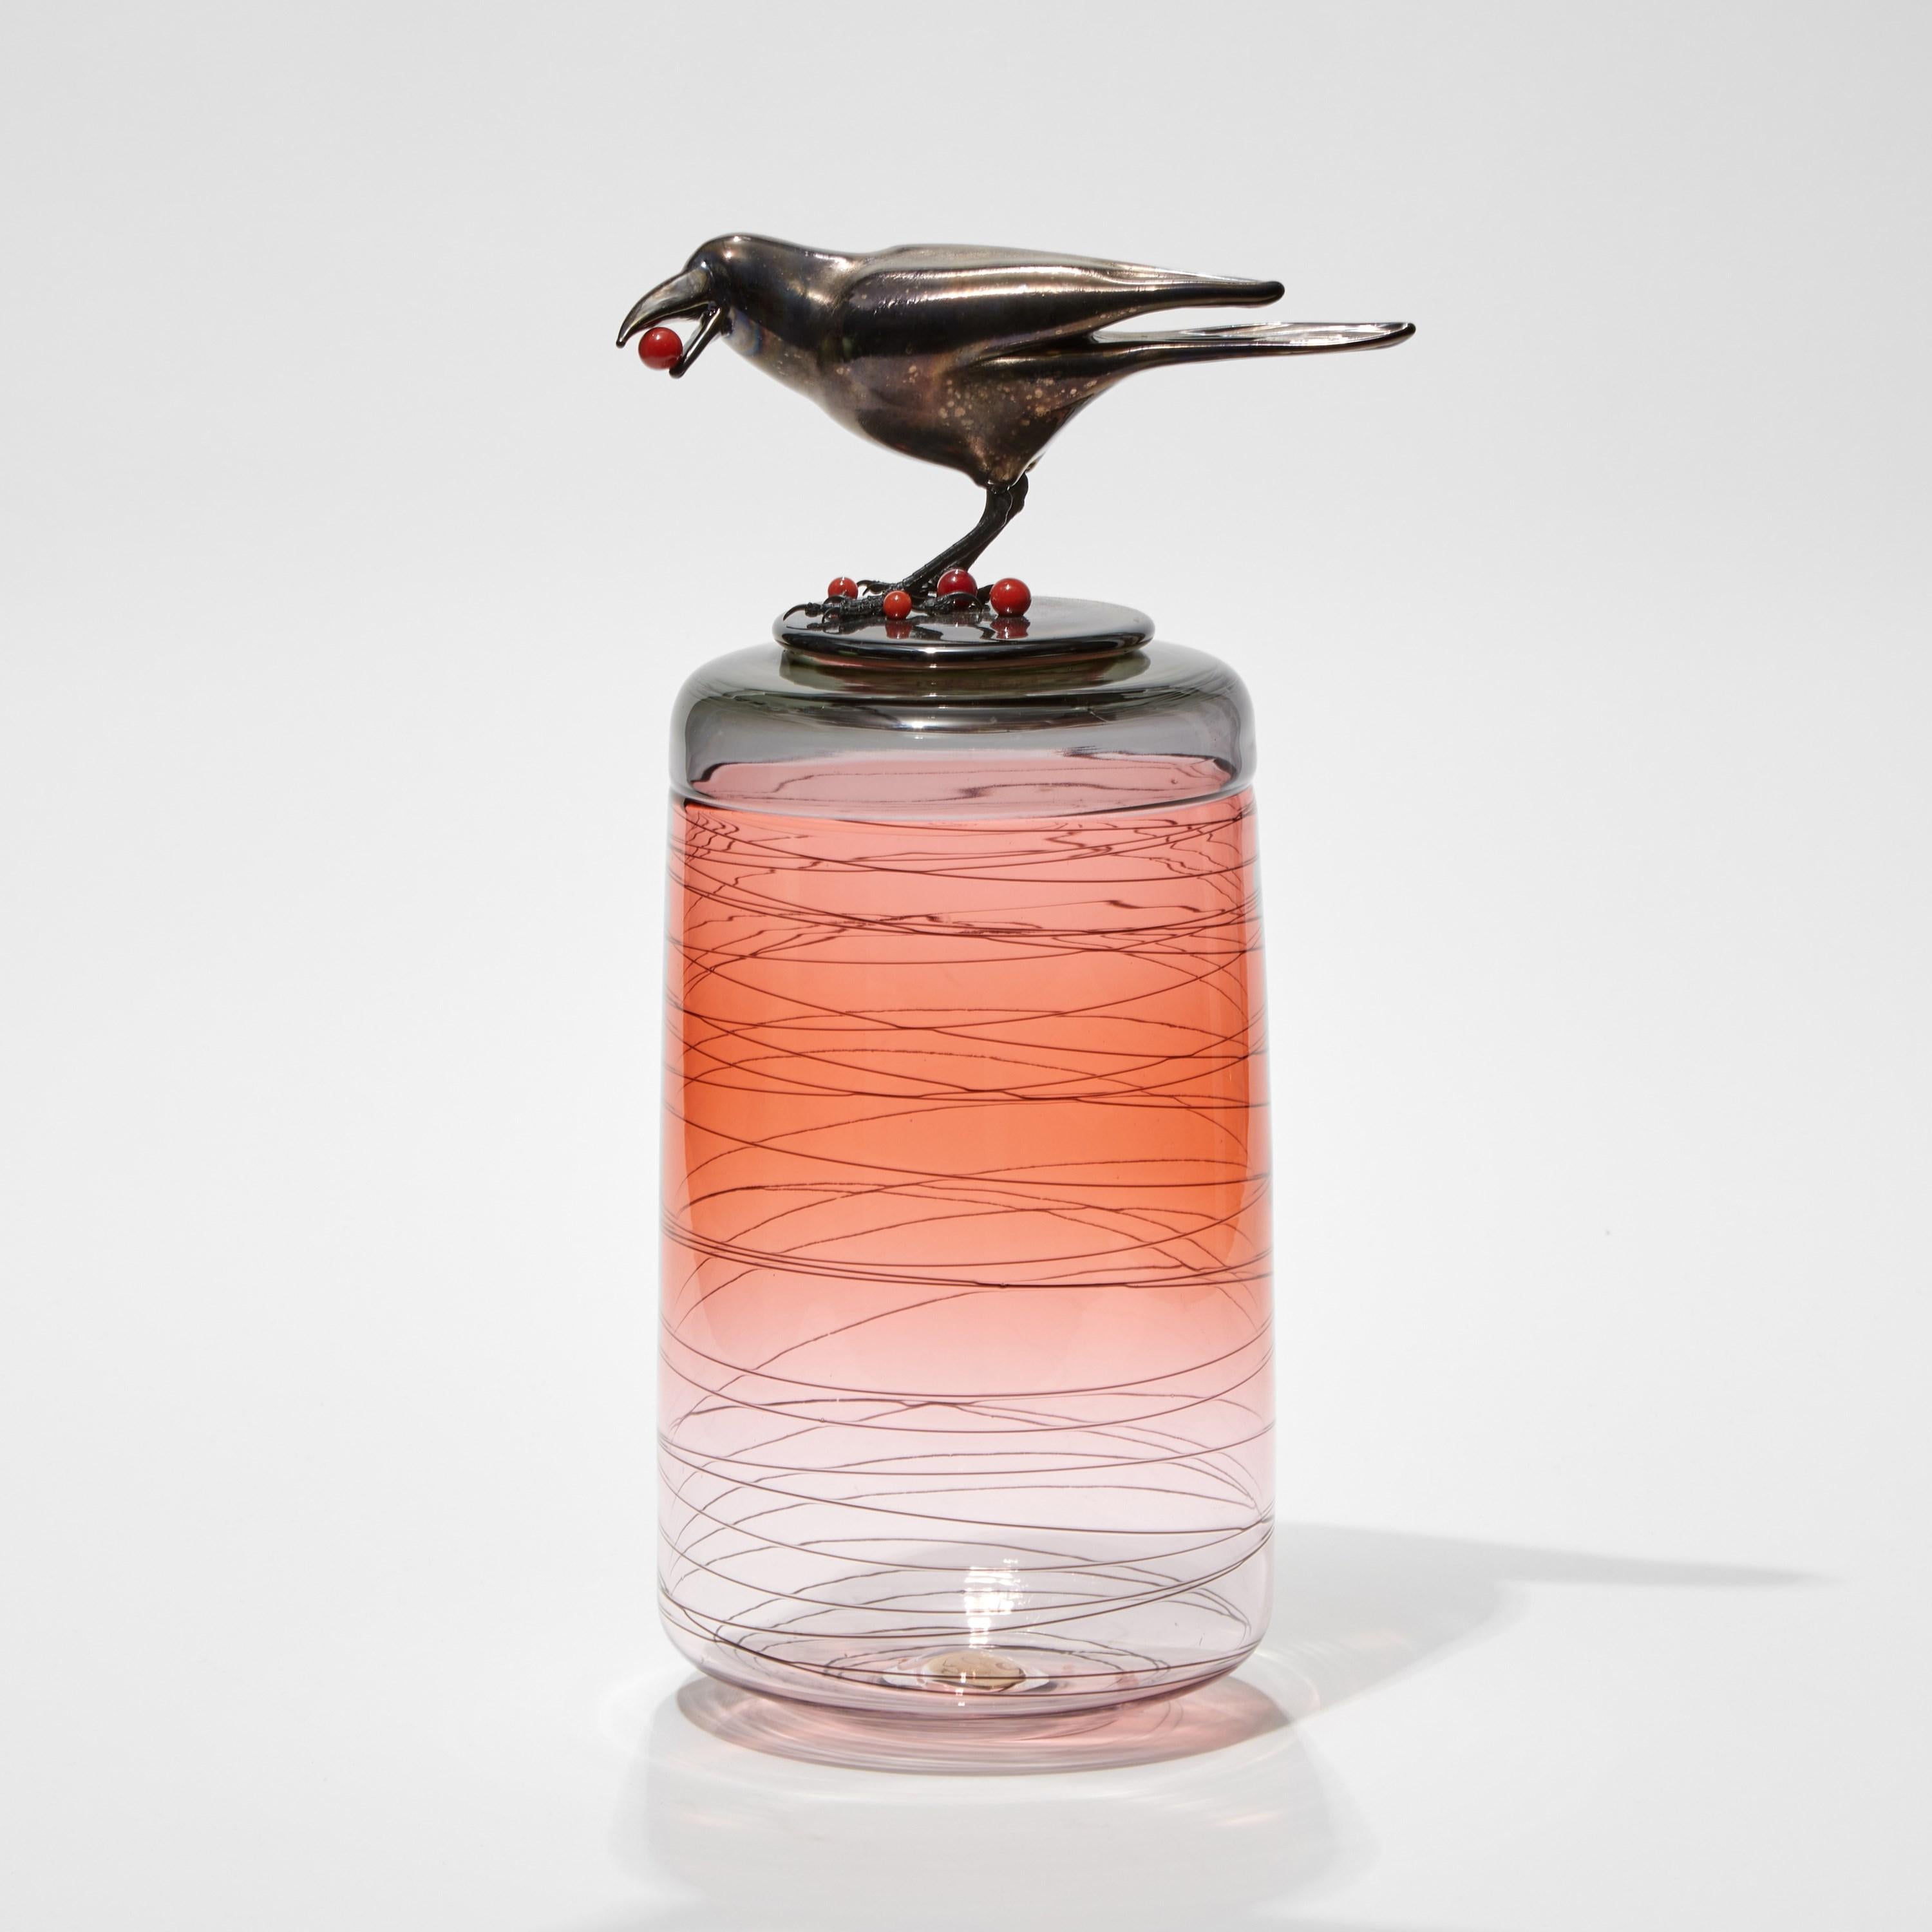 Cranberries II, is a hand-blown art glass vase in apricot / peach with a removable lid adorned with a hot sculpted black glass crow eating cranberries by the British artist Julie Johnson. The crow figurine can also be lifted off with the main body